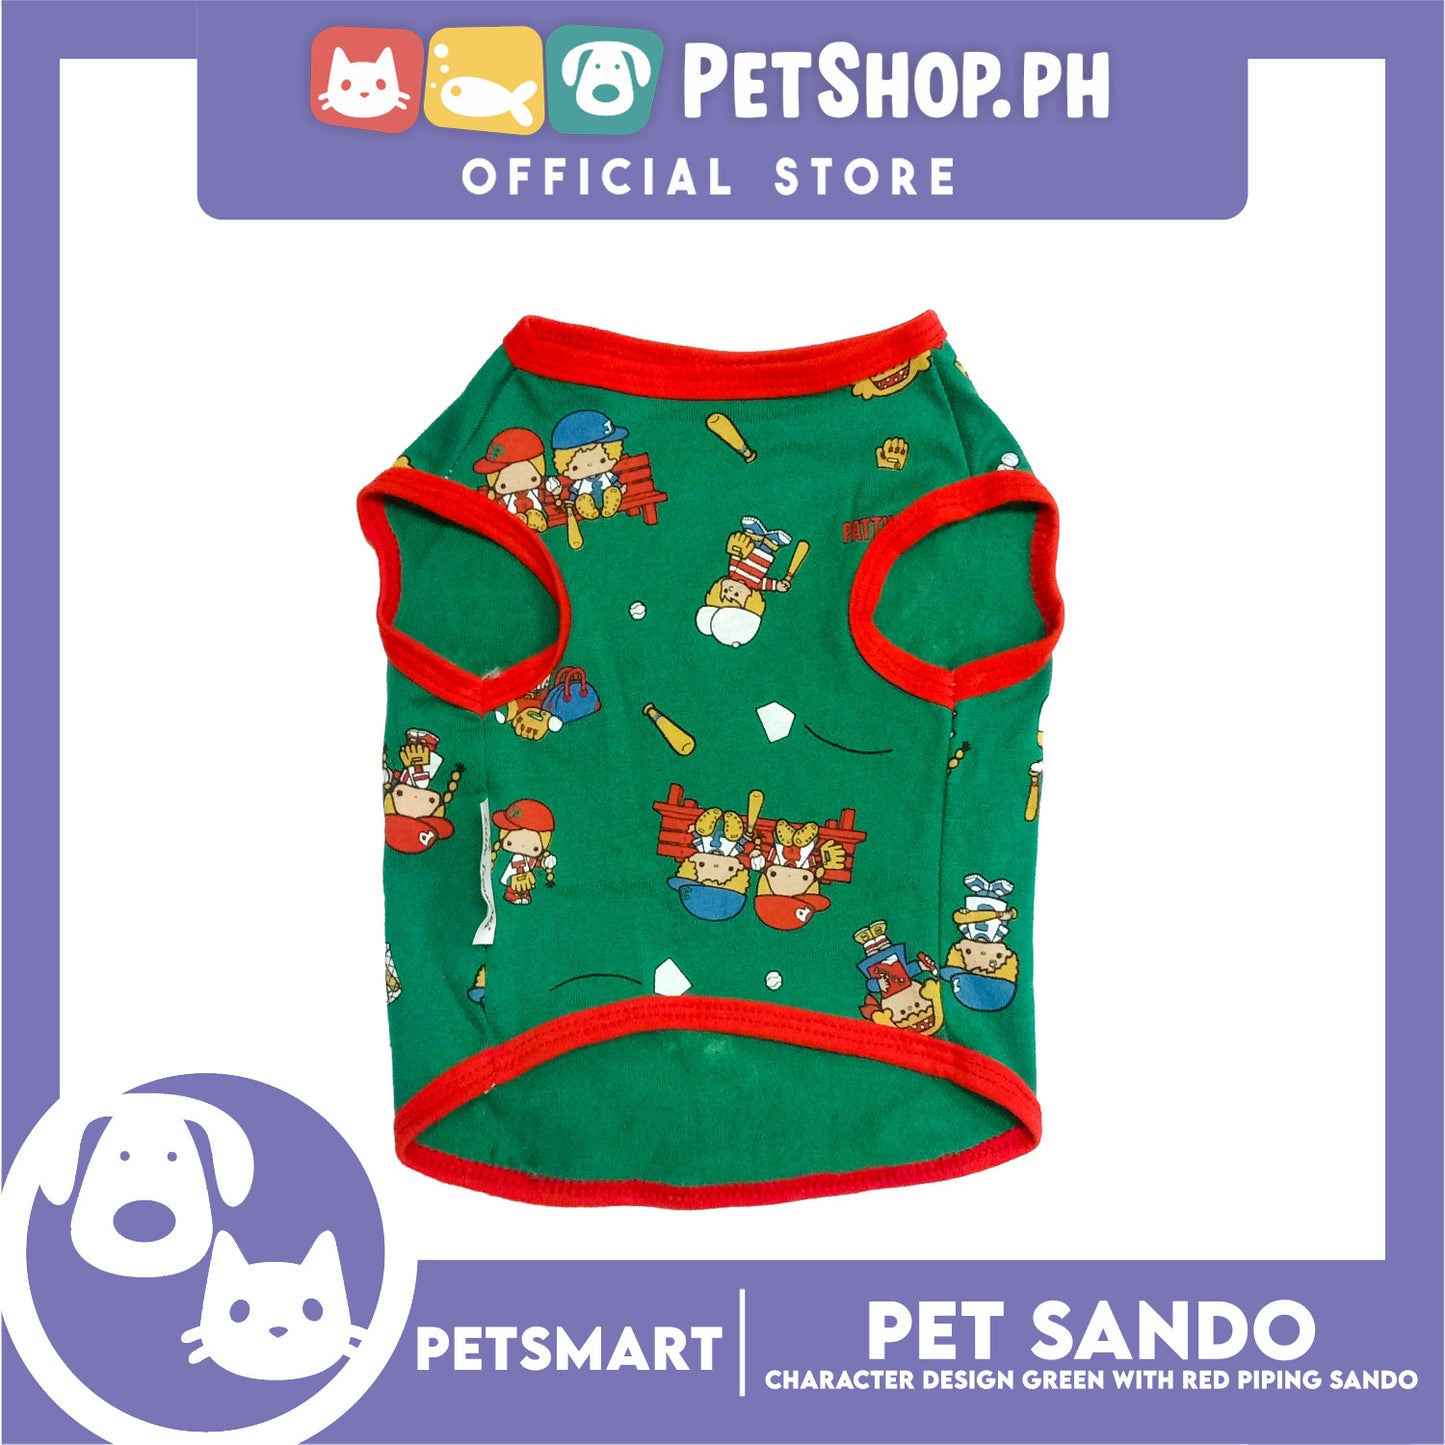 Pet Sando Character Design, Green with Red Piping Color, XL Size (DG-CTN199XL)